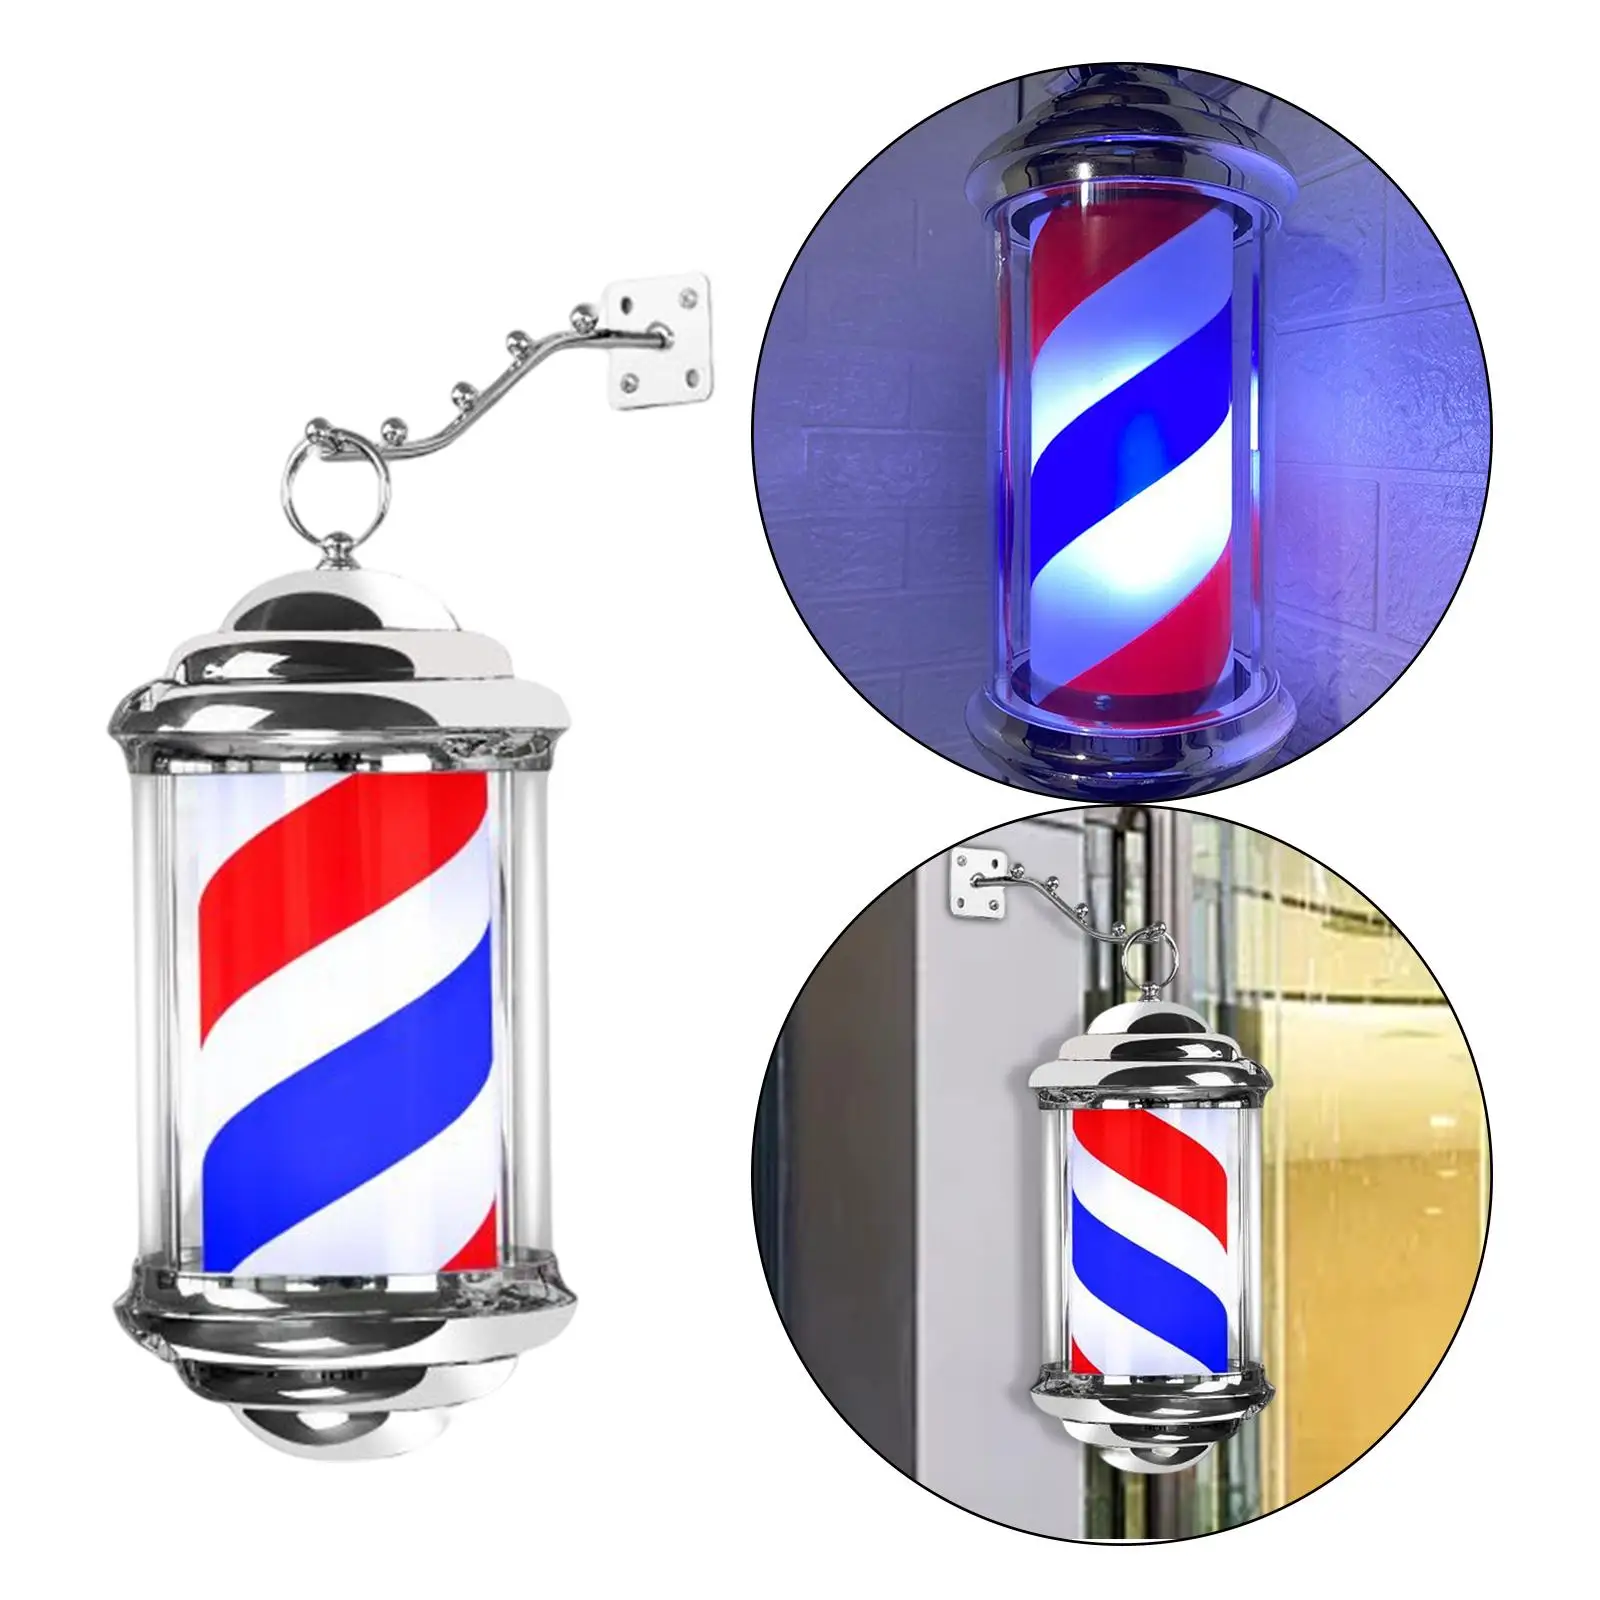 Barber Shop Pole Light Stripe Rotating Hair Salon Shop Open Signs Wall Mount with Hanging Rack LED Light for Street Indoor Party